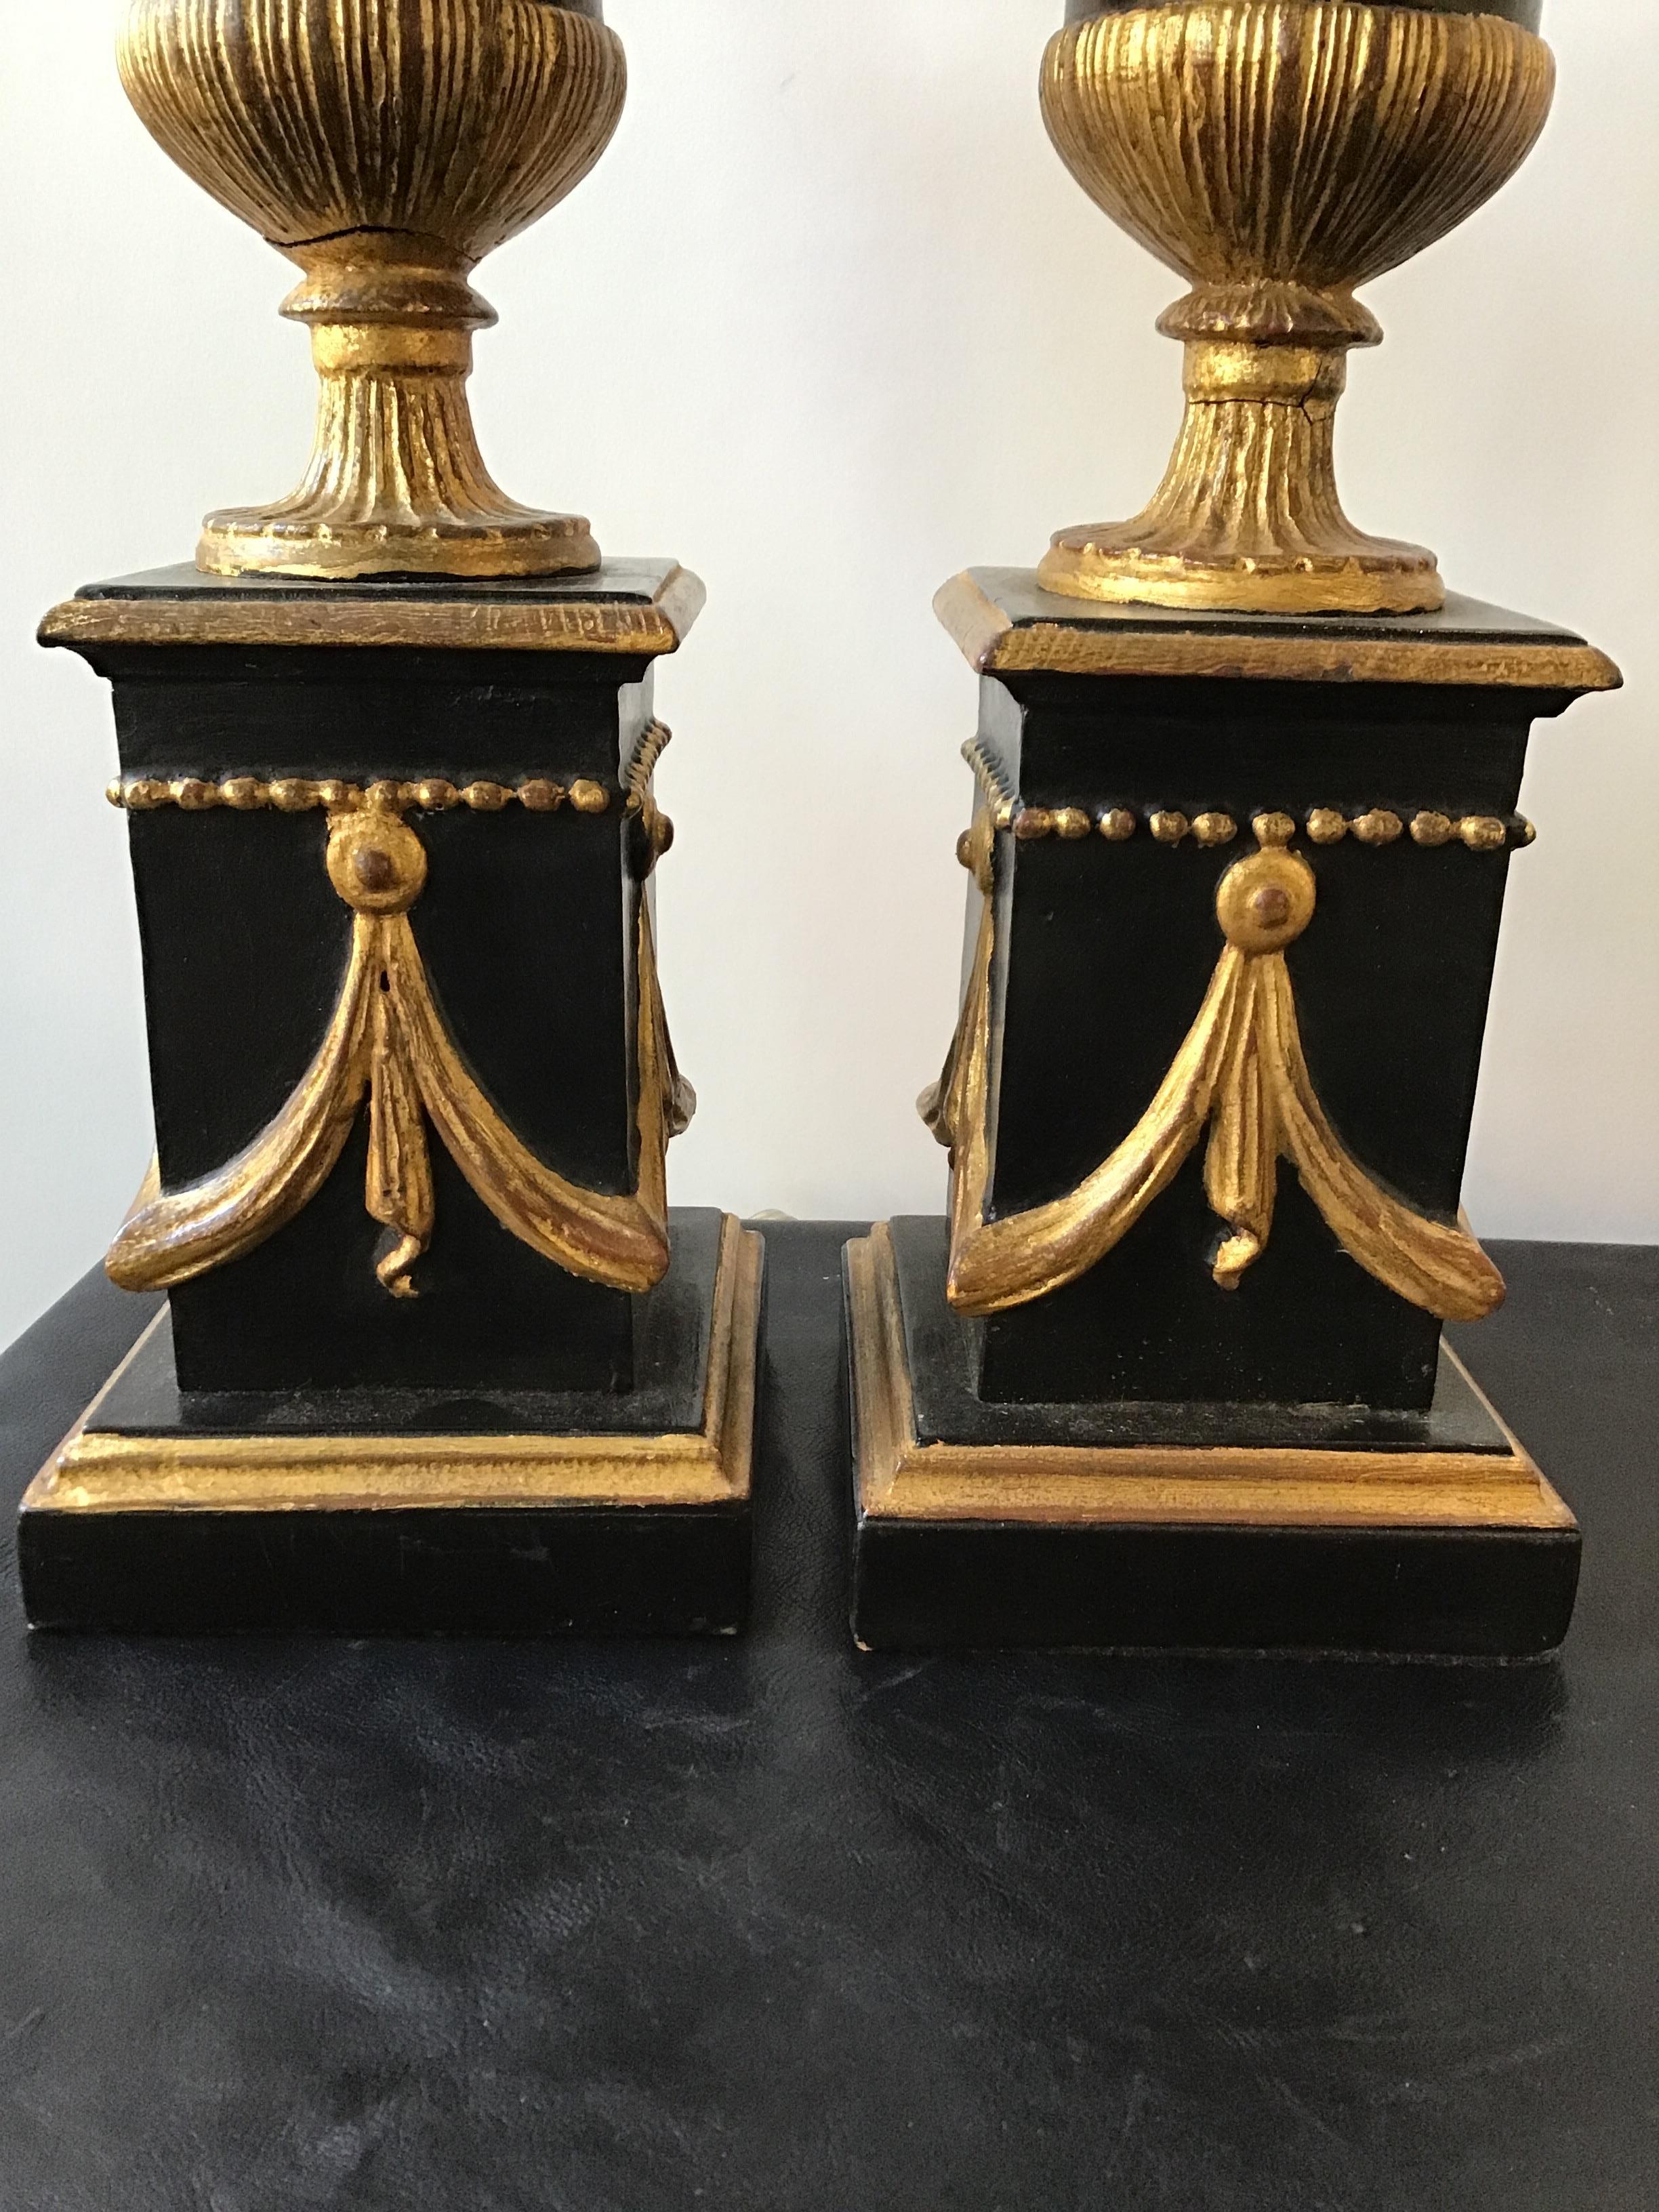 Pair of 1920s Italian Giltwood Urn Lamps In Good Condition For Sale In Tarrytown, NY